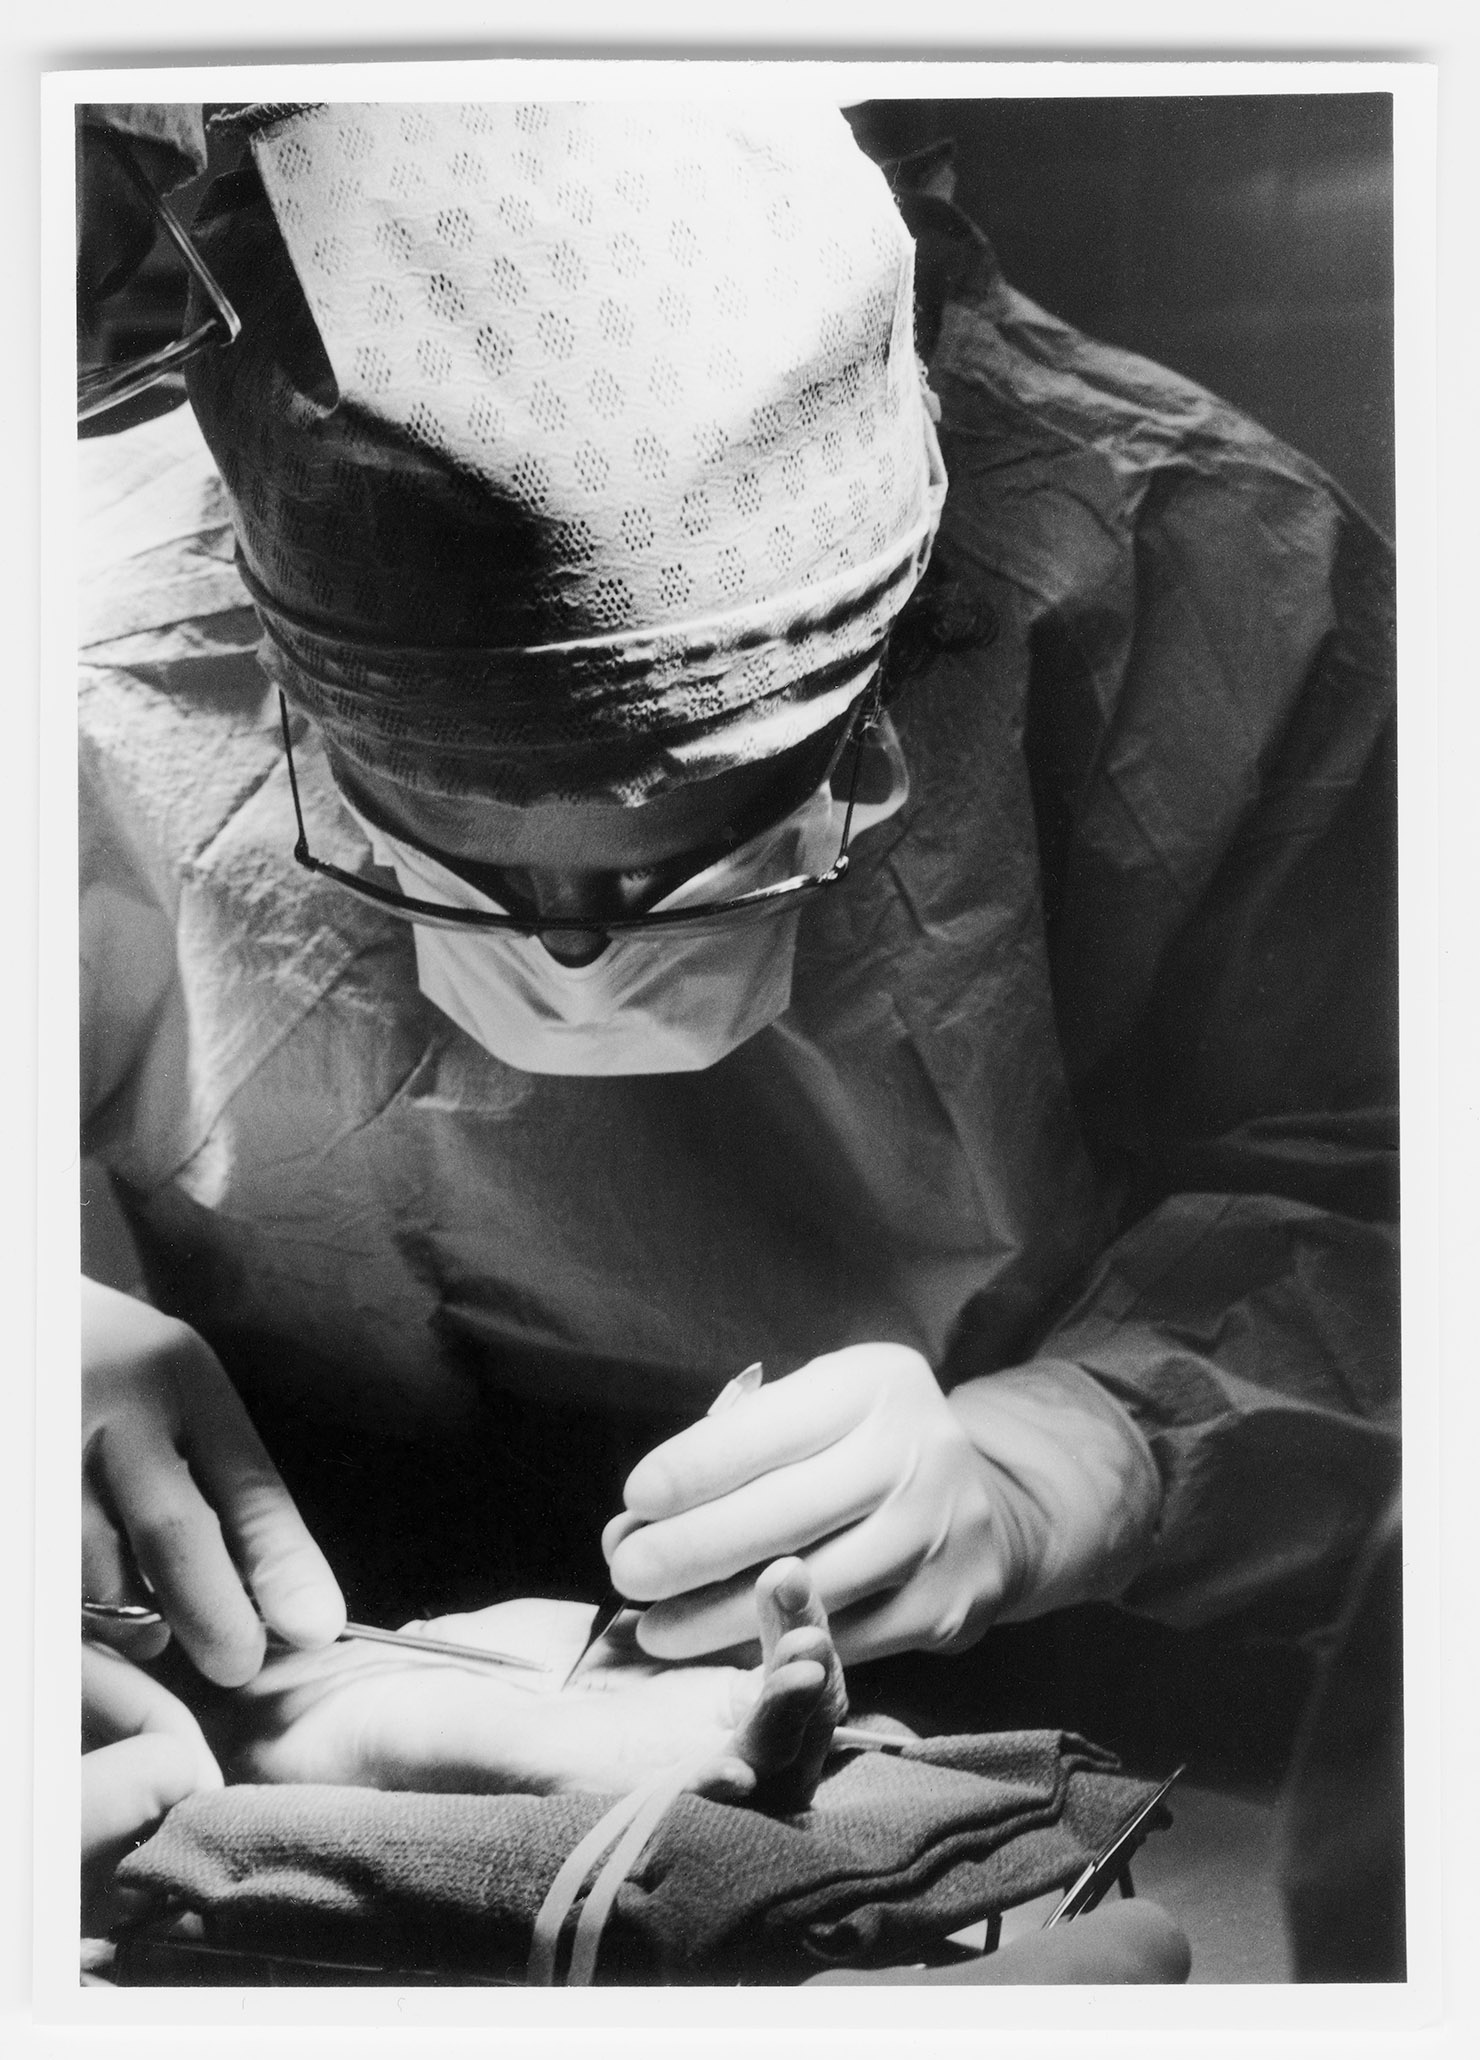 Williams performing surgery on a hand